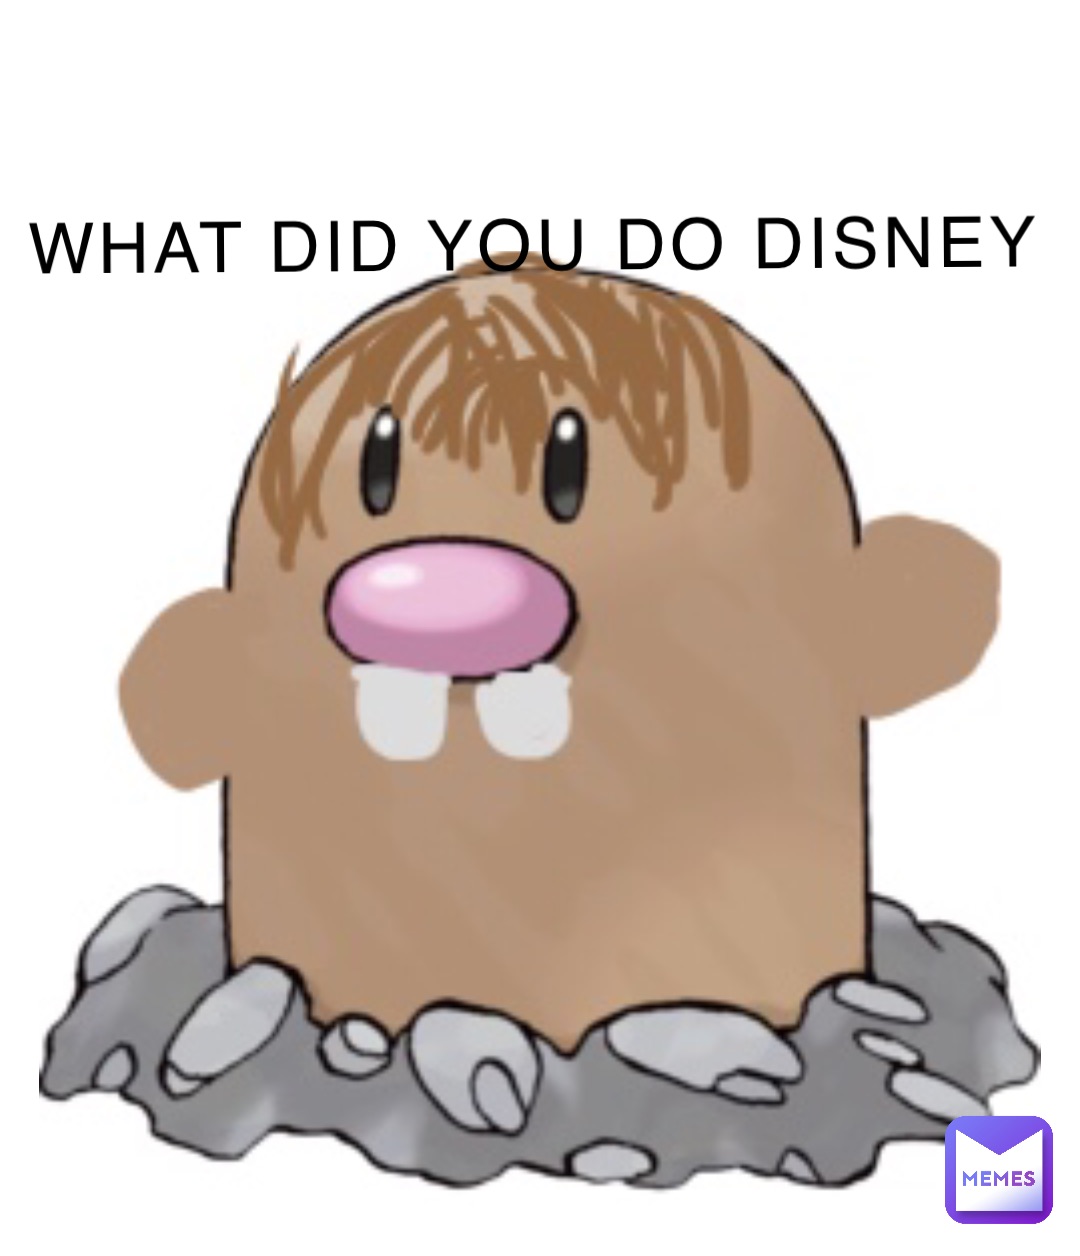 WHAT DID YOU DO DISNEY